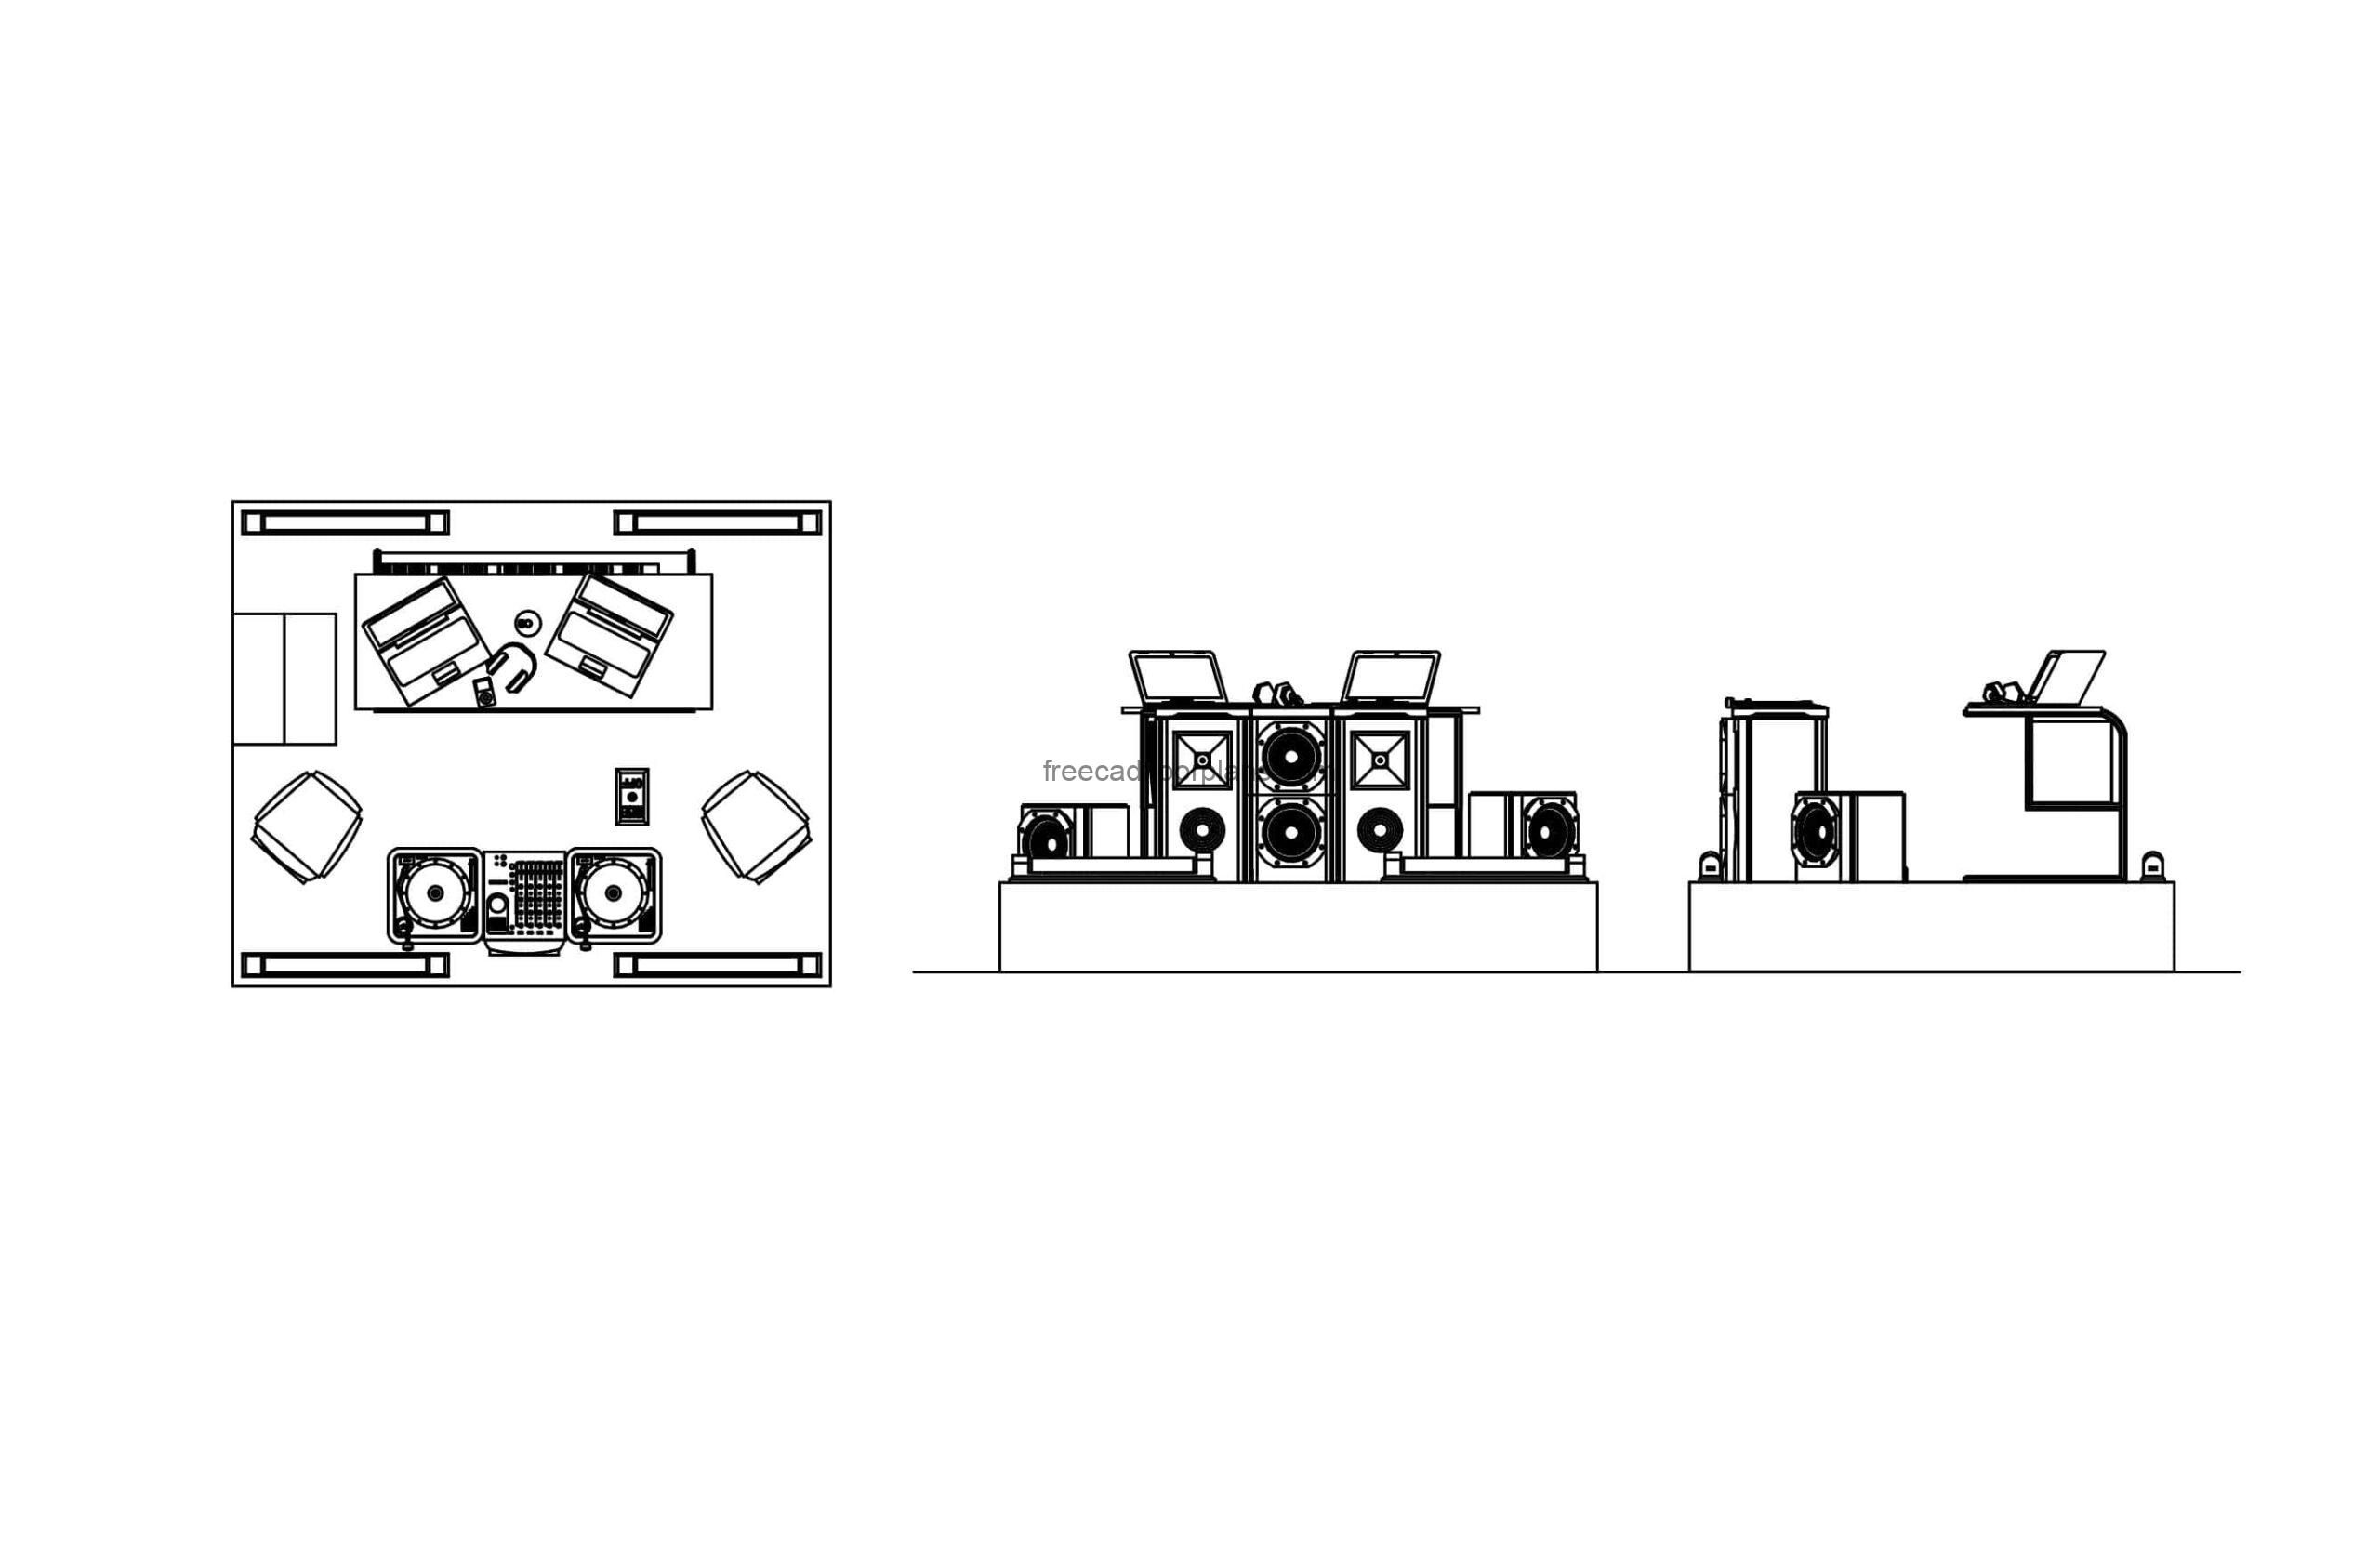 dj station with sound system drawing in dwg cad format all 2d views included for free download